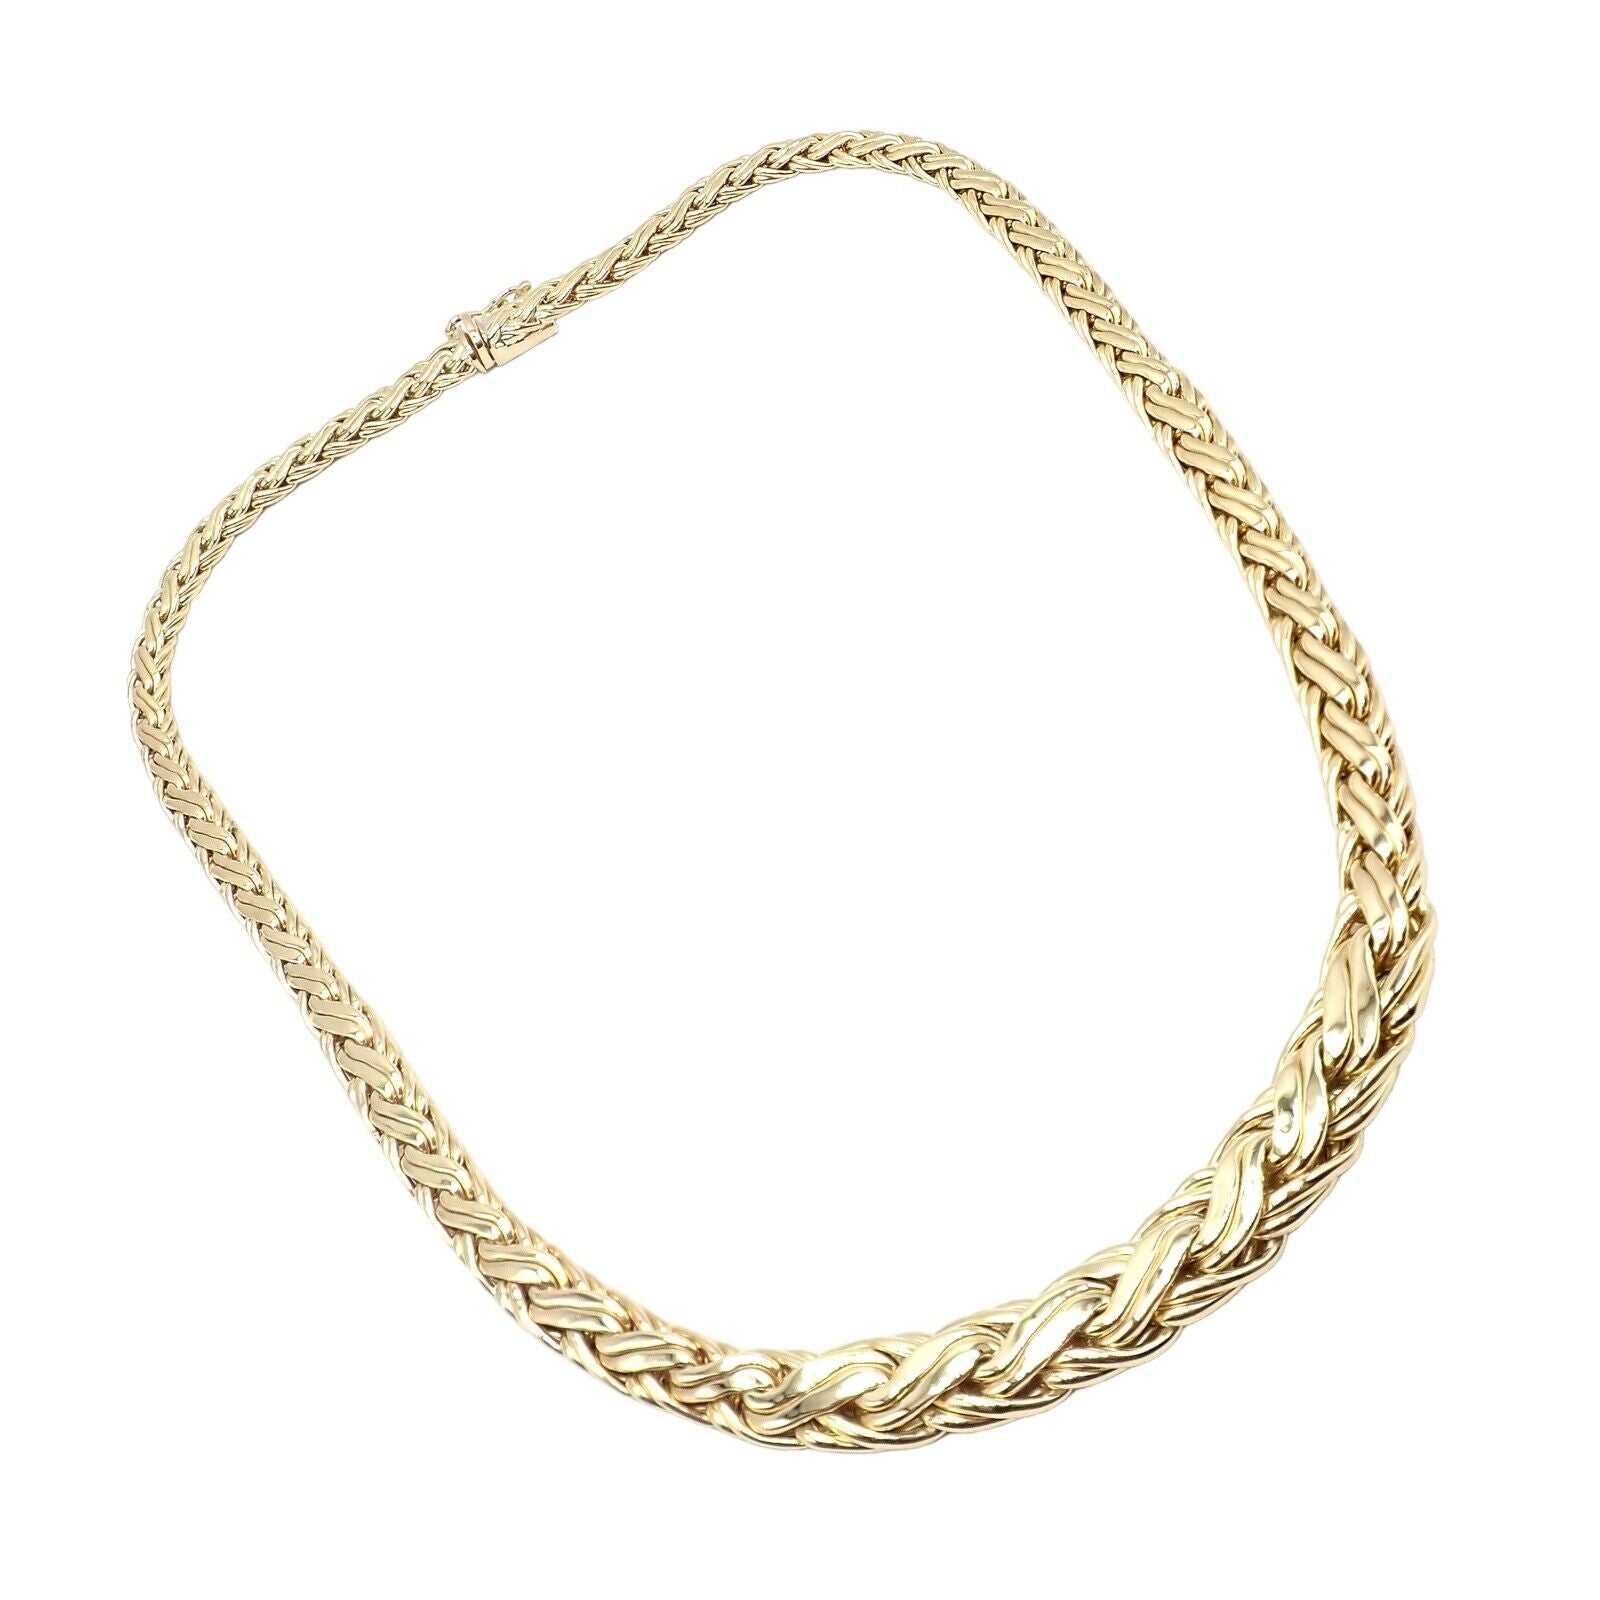 Tiffany & Co. Jewelry & Watches:Fine Jewelry:Necklaces & Pendants Authentic! Tiffany & Co 18k Yellow Gold Russian Weave Gradual Link Necklace